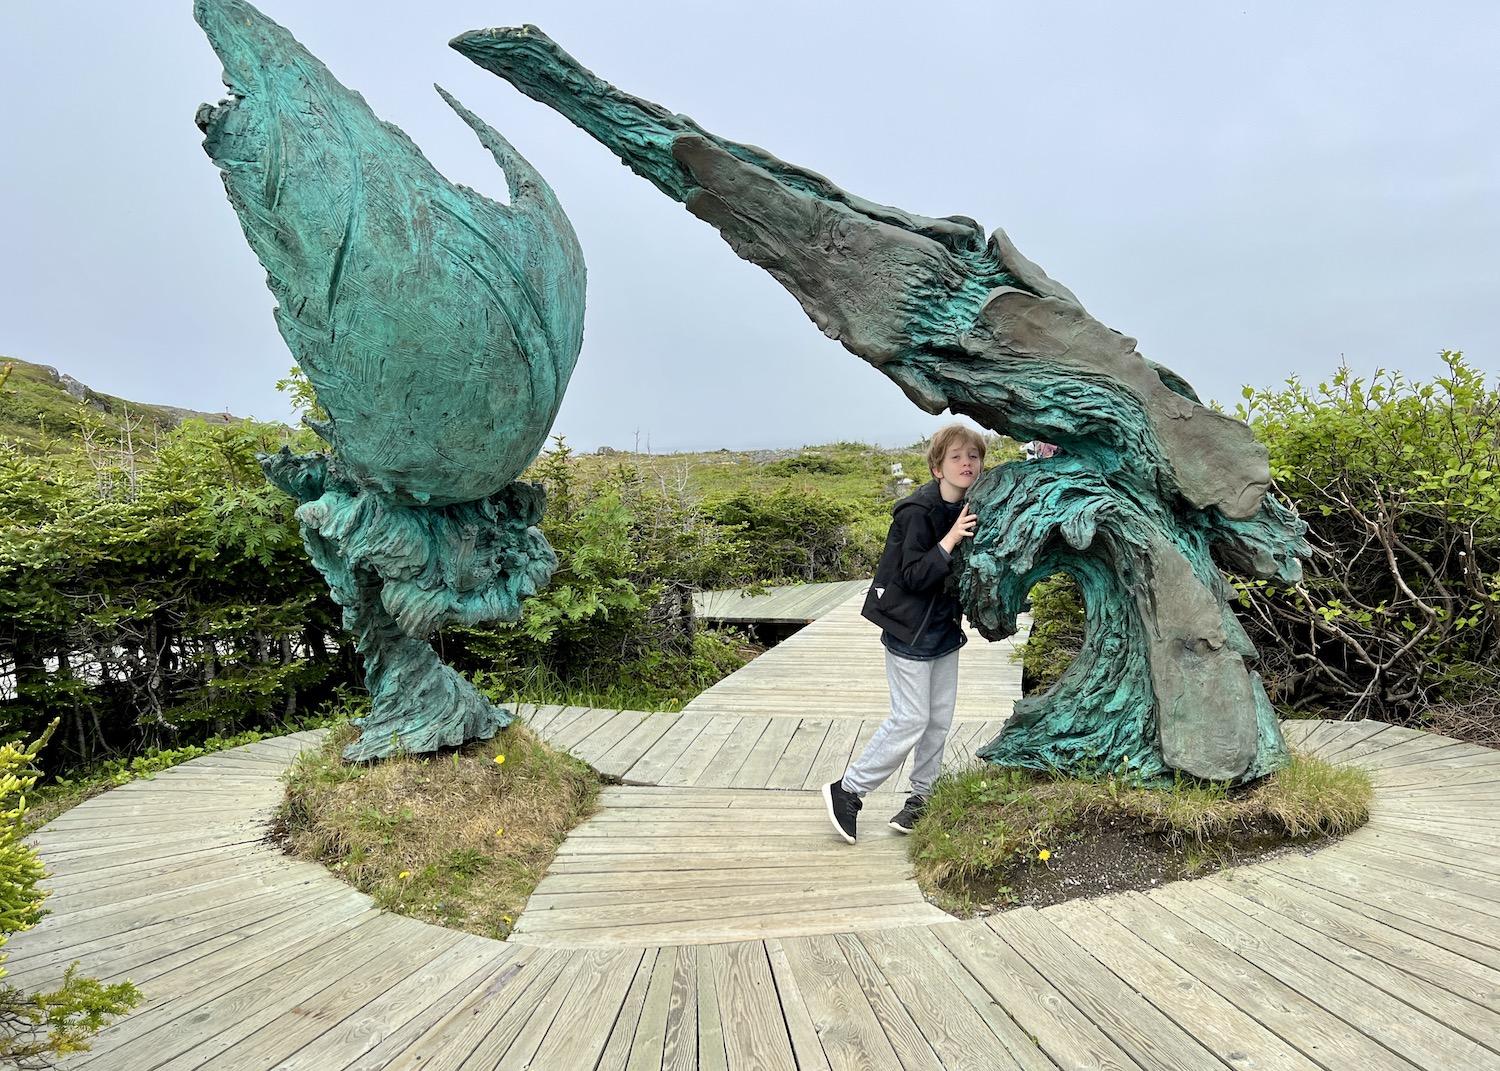 The Meeting of Two Worlds sculpture represents Indigenous and European cultures finally meeting near L'Anse aux Meadows as humans finally circumnavigated the globe.